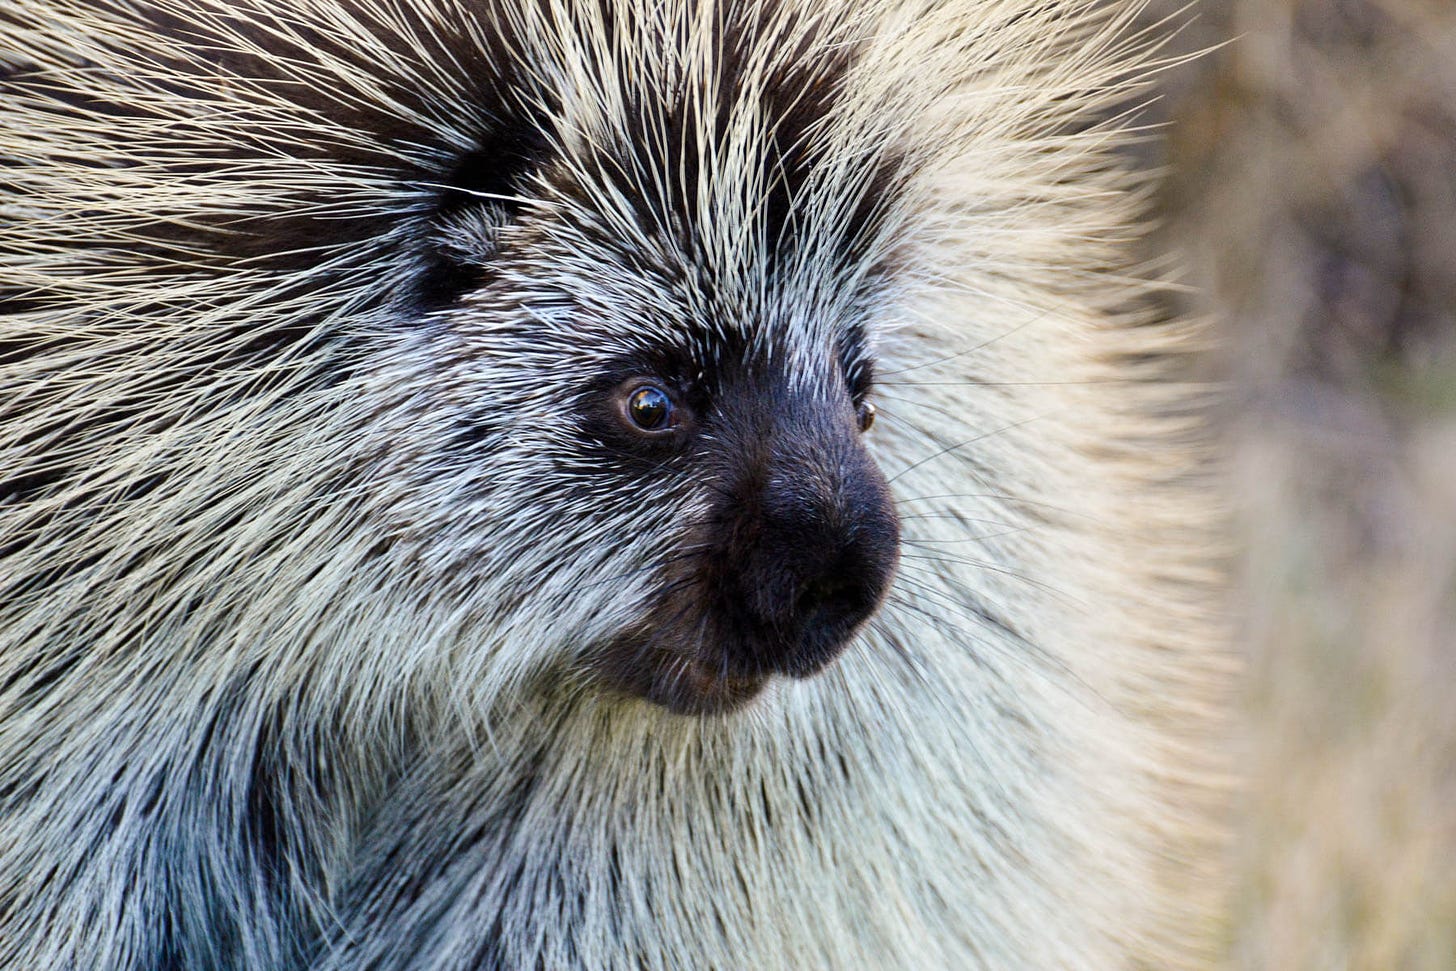 The North American porcupine has a few tricks up its quills ...